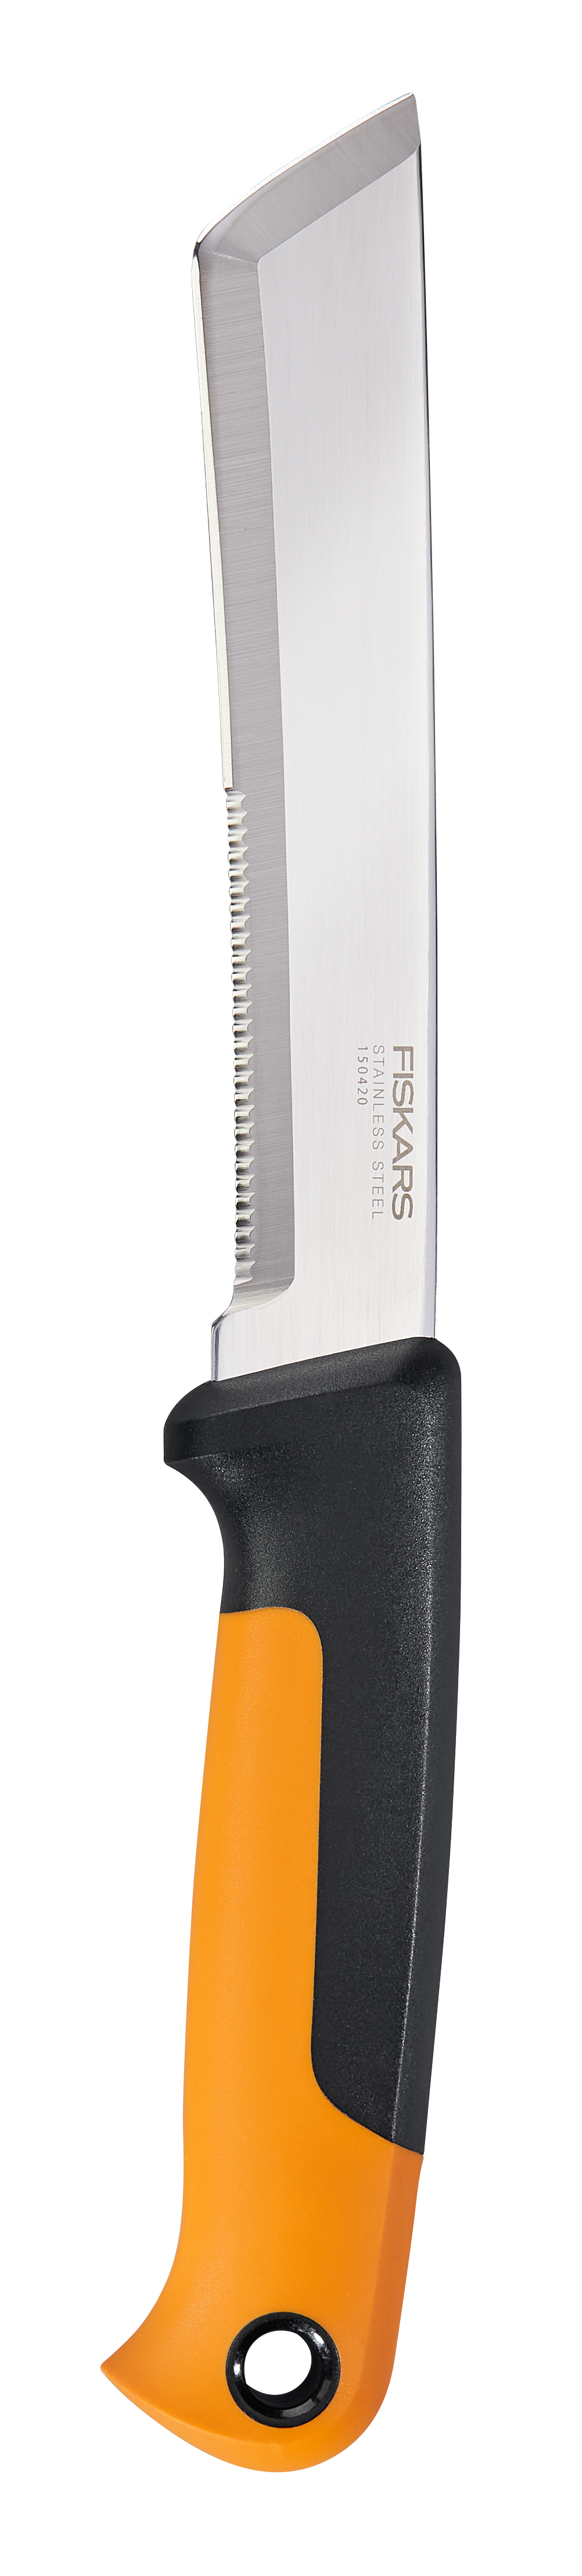 Fiskars 18" Harvesting Knife with Stainless Steel Blade and Sheath - image 1 of 10